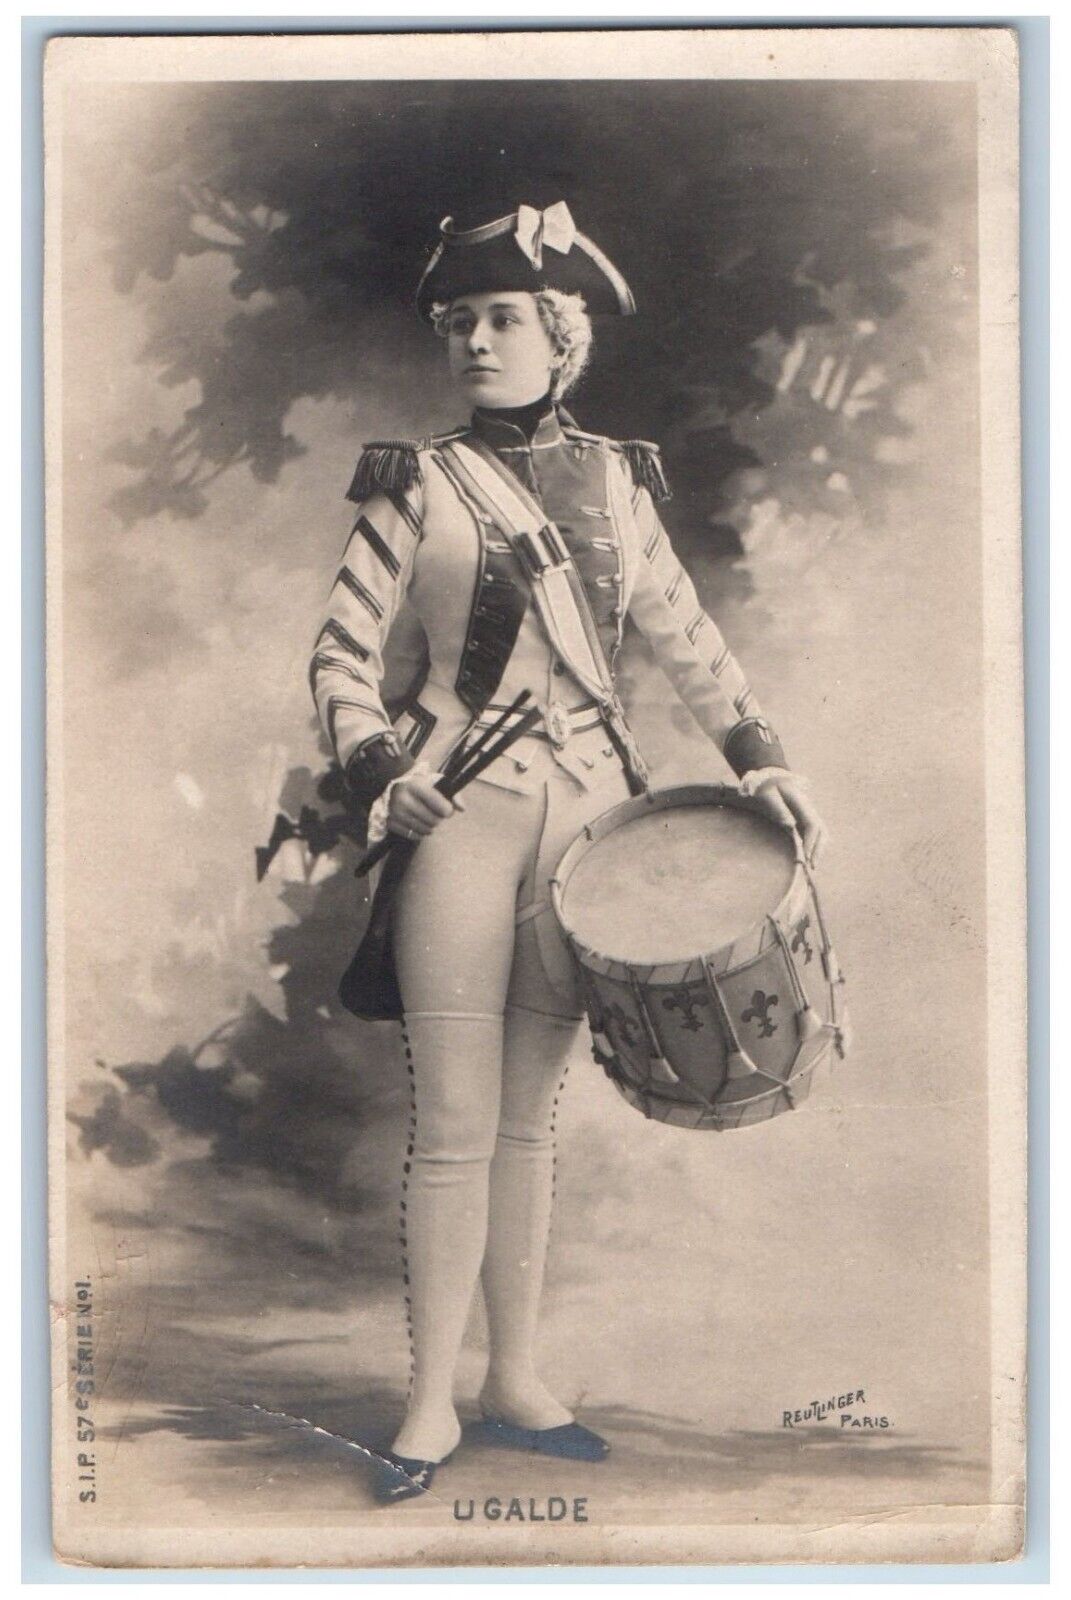 France Postcard RPPC Photo French Opera Singer With Drum c1910's Antique